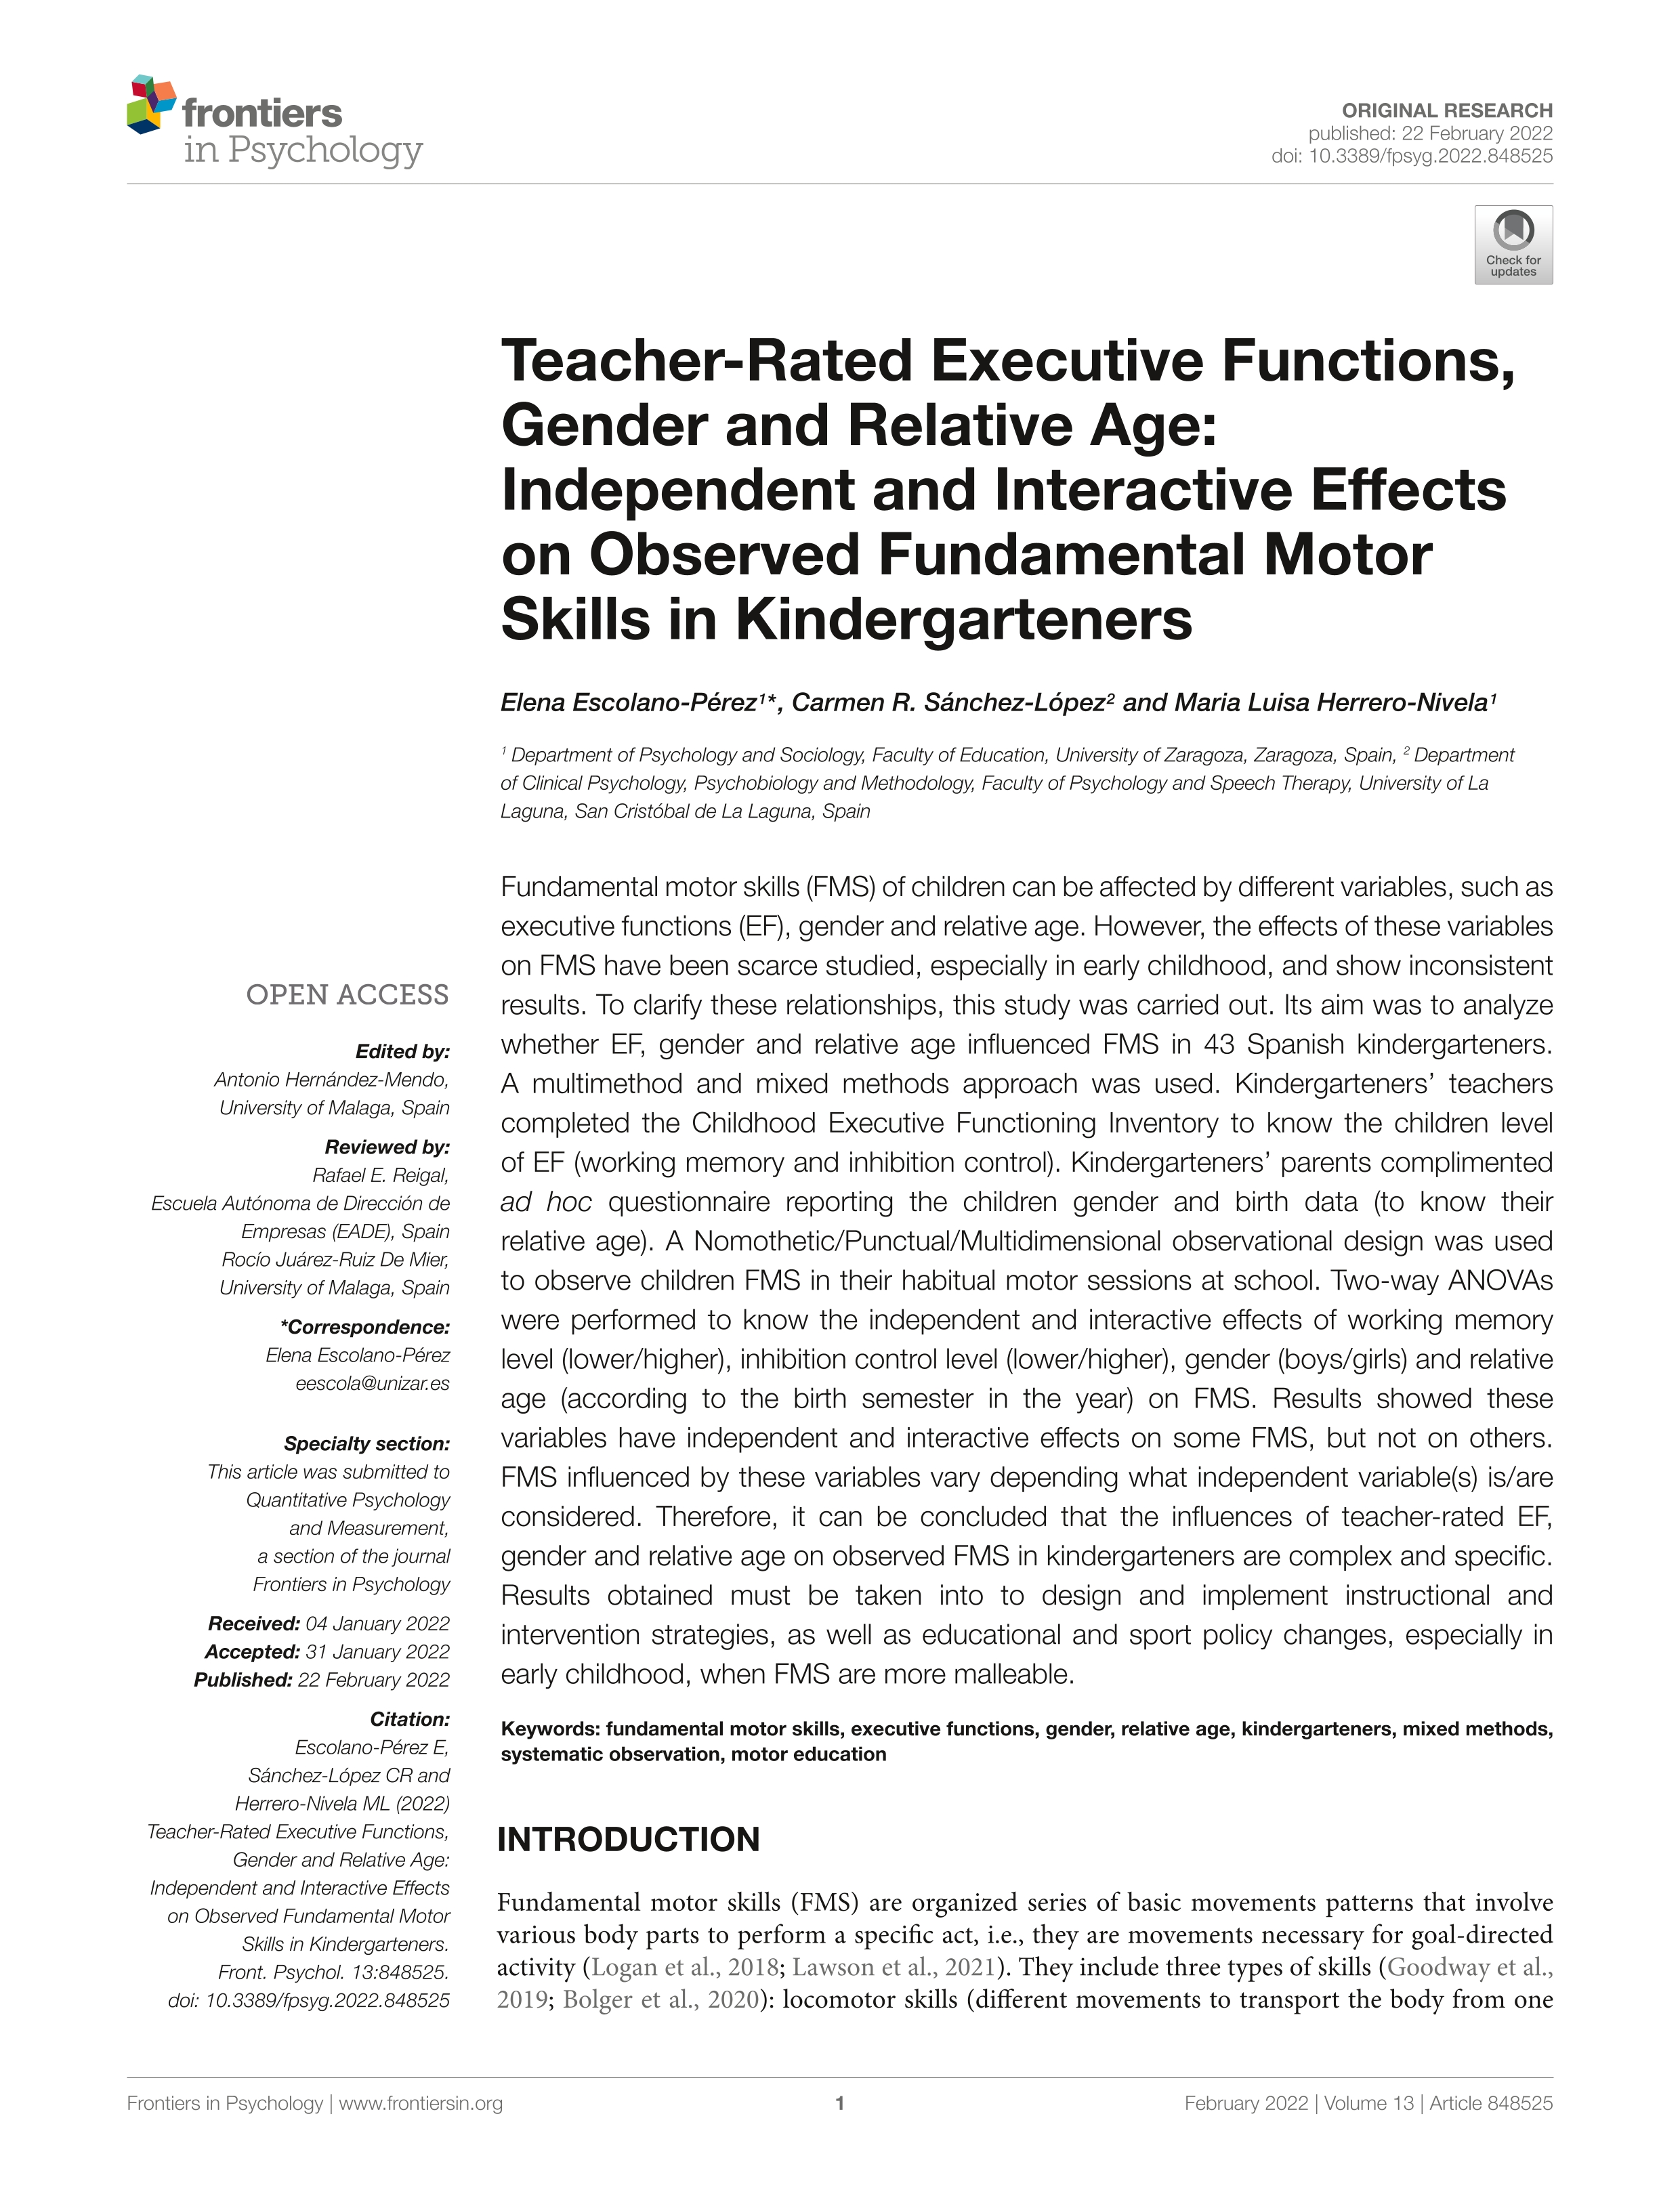 Teacher-Rated Executive Functions, Gender and Relative Age: Independent and Interactive Effects on Observed Fundamental Motor Skills in Kindergarteners